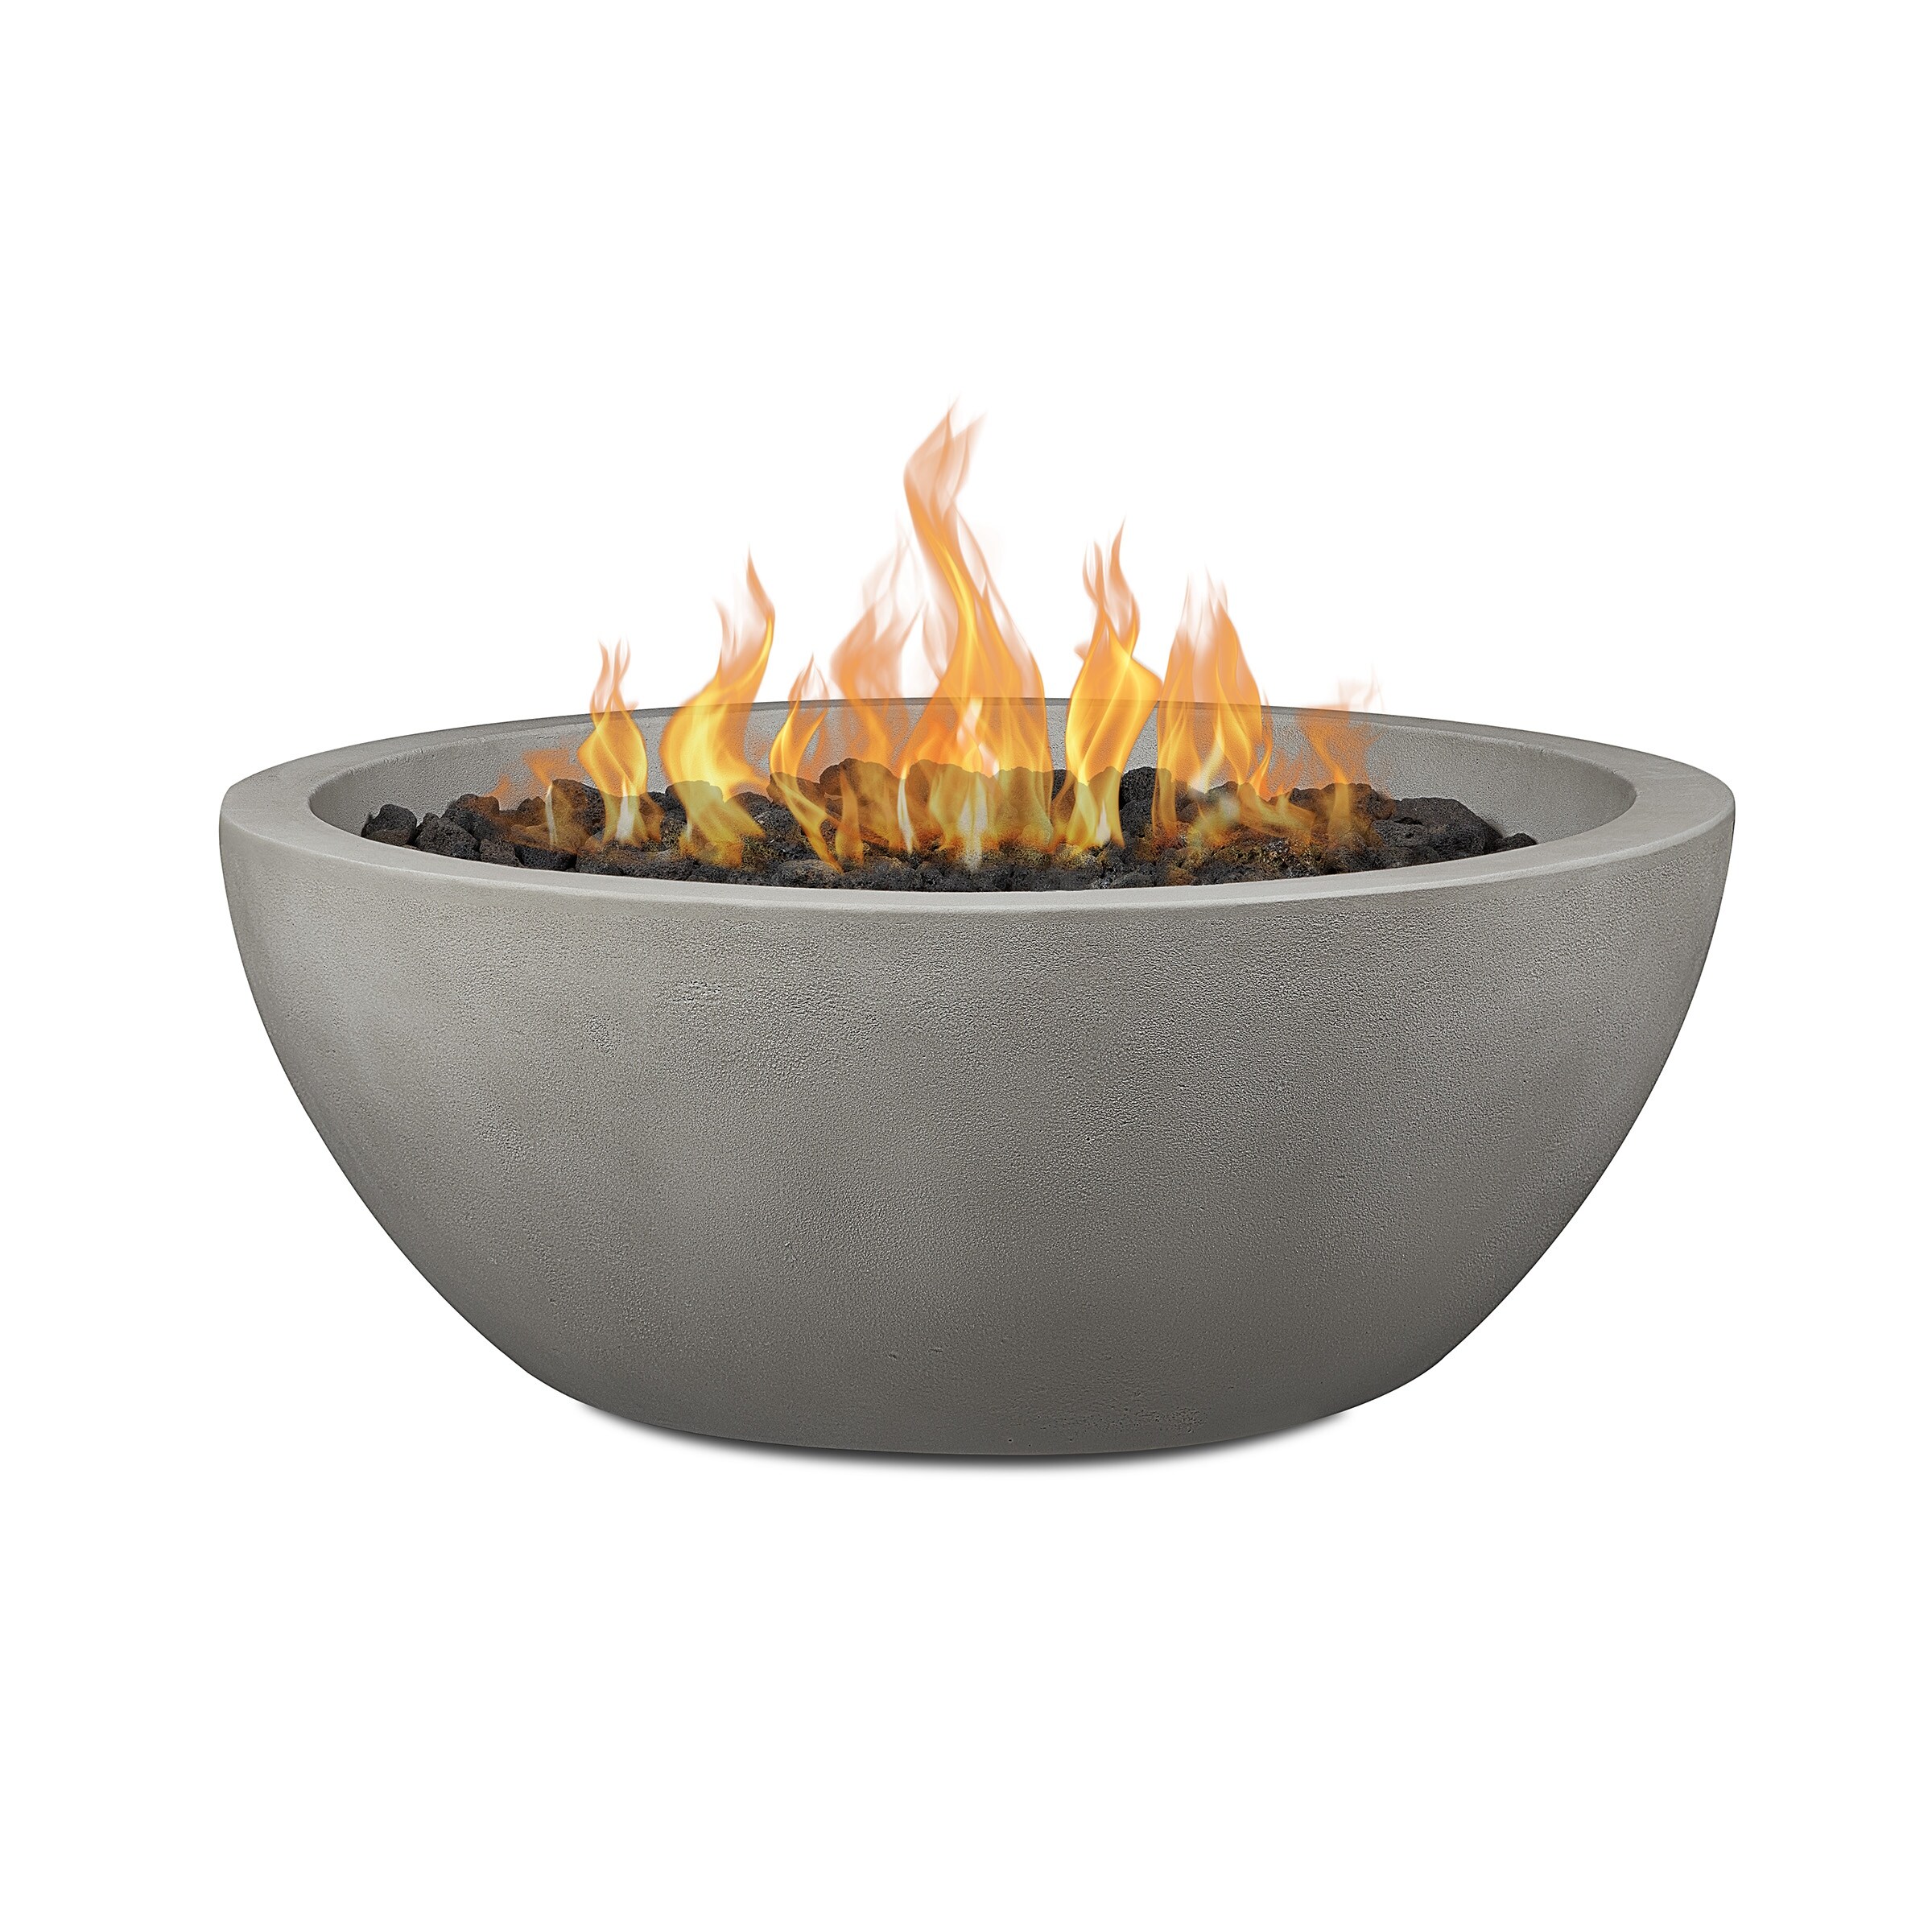 https://ak1.ostkcdn.com/images/products/is/images/direct/6a05a0882d44190bcef98629a95080cbcc19e89c/Alta-Medium-Natural-Gas-Fire-Bowl-in-Shade-by-Jensen-Co.jpg